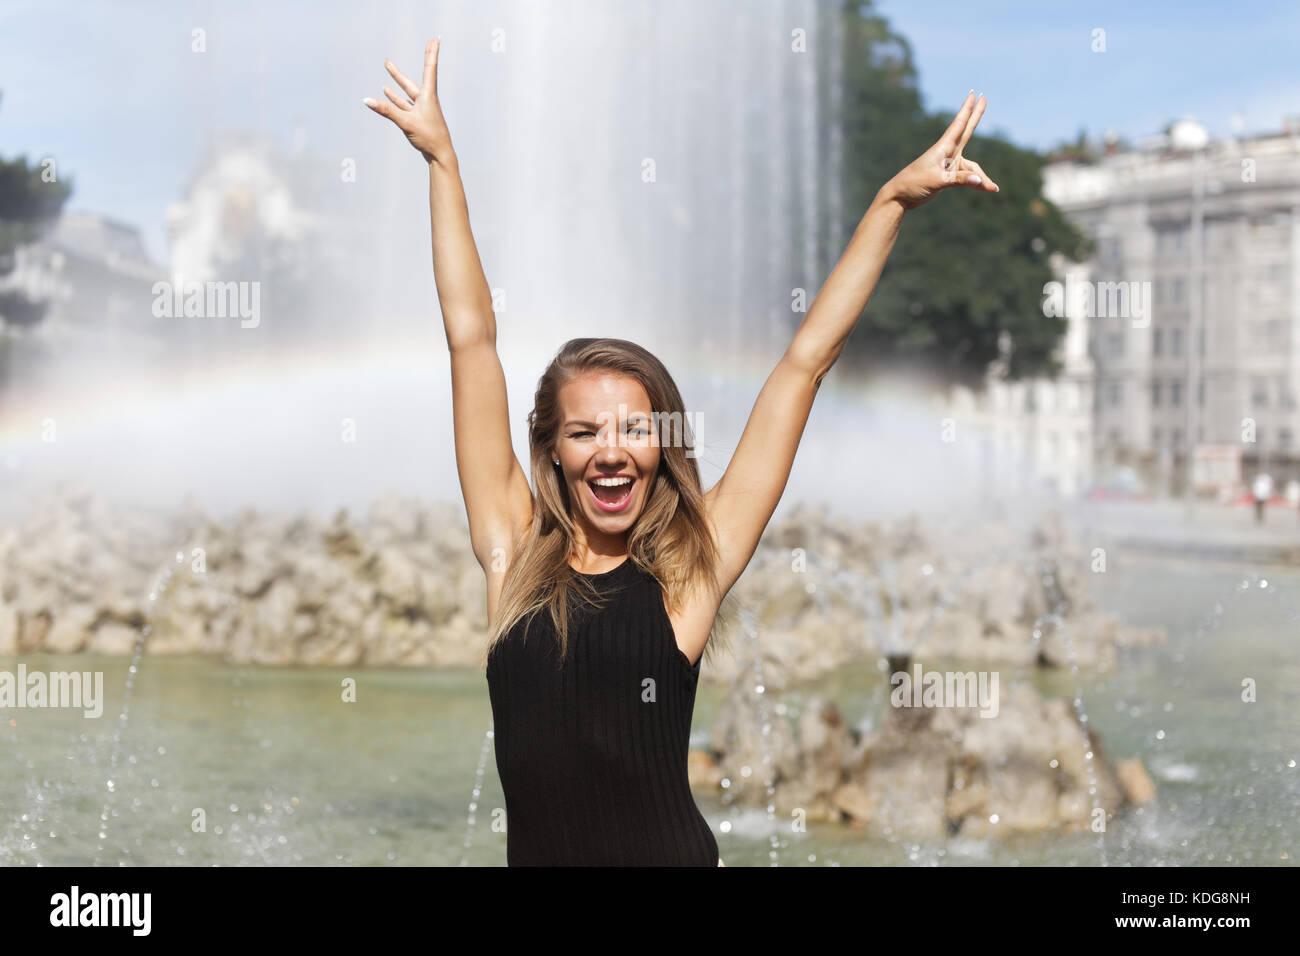 Young carefree woman hands up in the air at park fountain Stock Photo